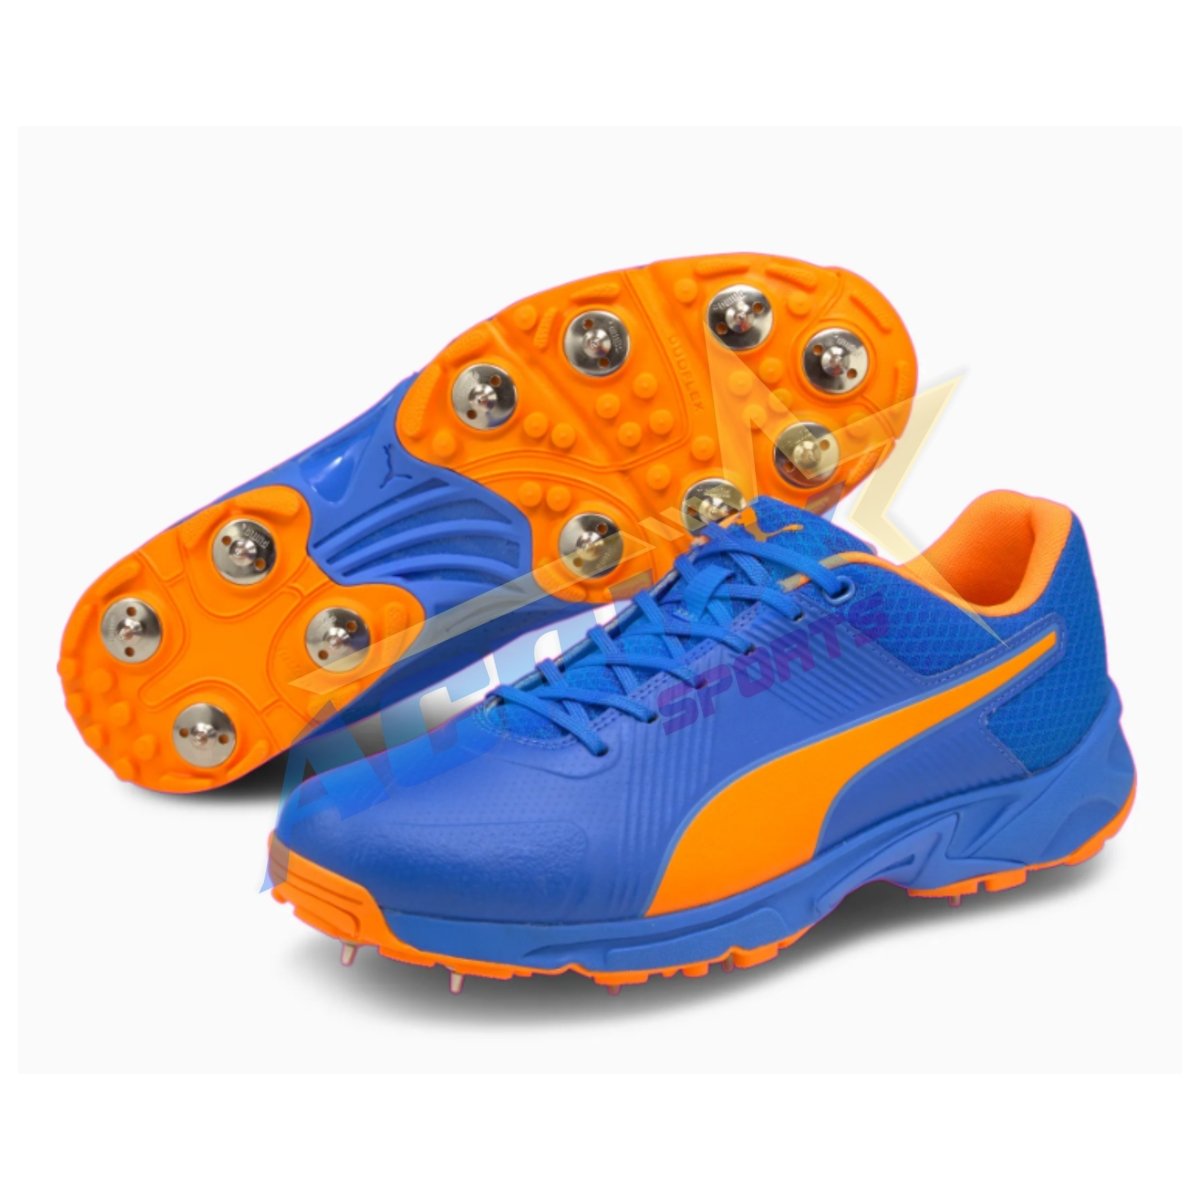 Puma One8 19.2 Cricket Shoes With Steel Spikes.